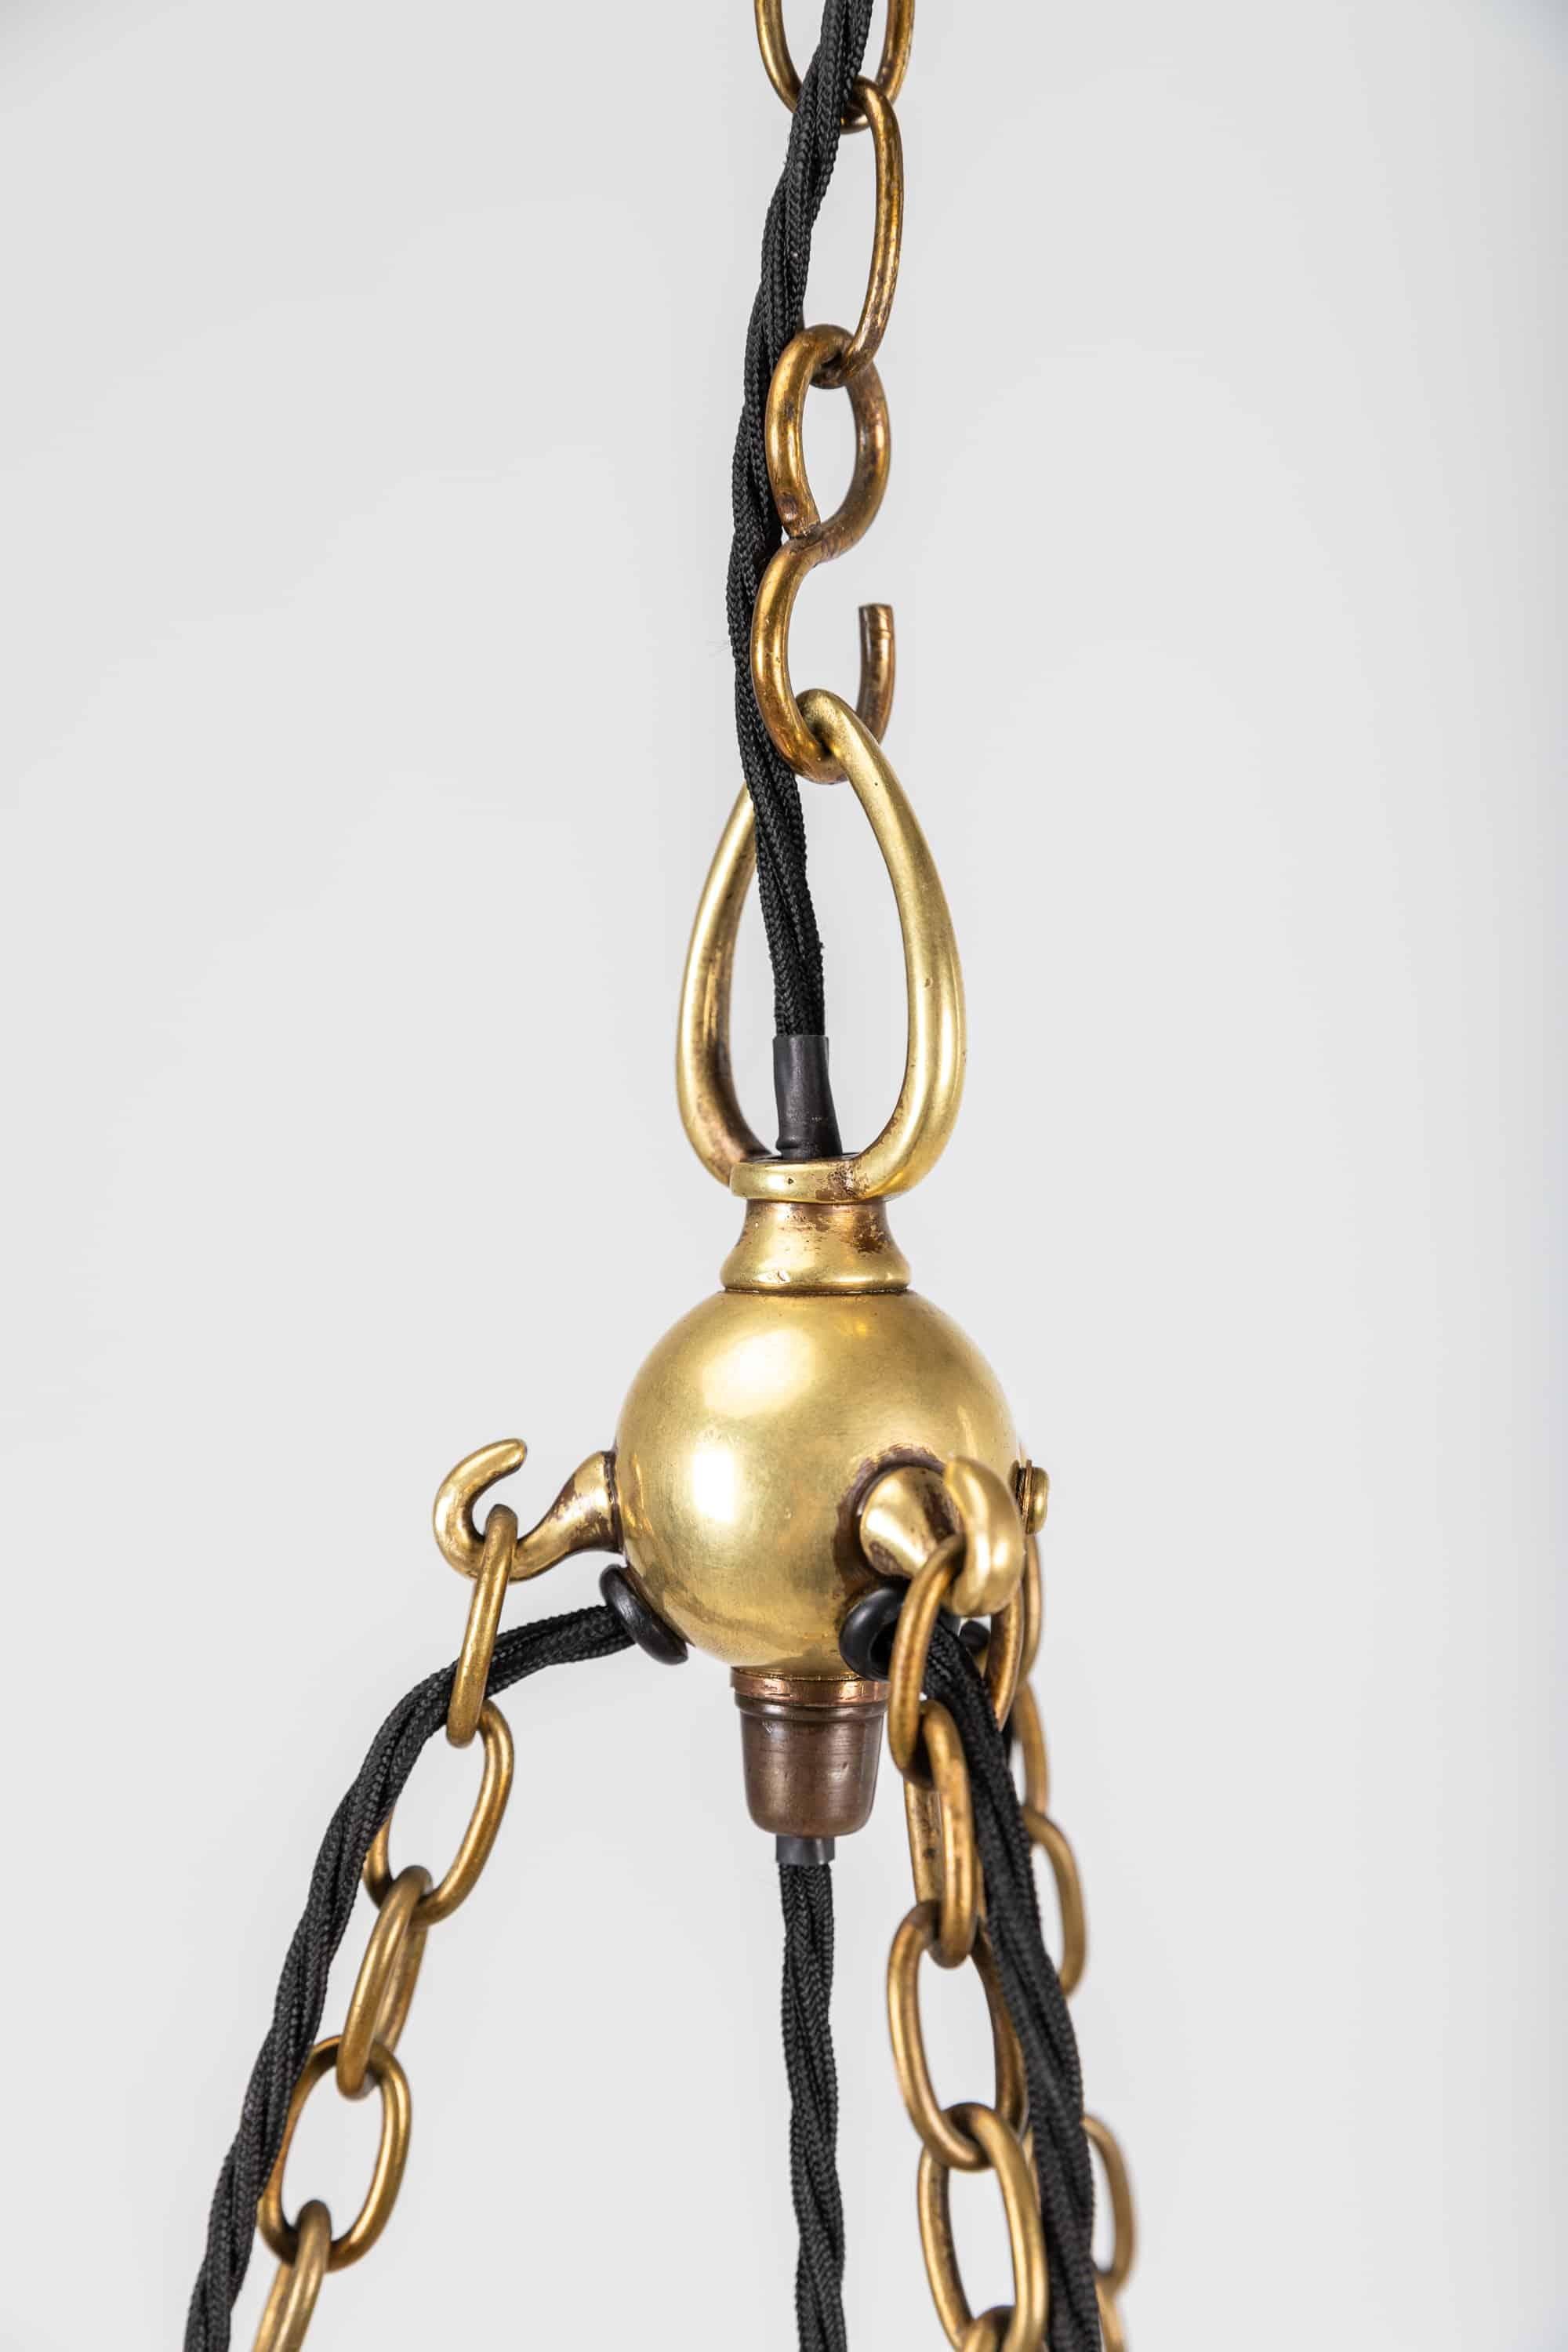 An incredible 'Stiletto' chandelier made in England by Holophane. c.1915.

Comprising of inner bowl, top plate, three 'stiletto' shades with original three armed ornate brass ring, galleries and ball hook.

A superb statement piece of period